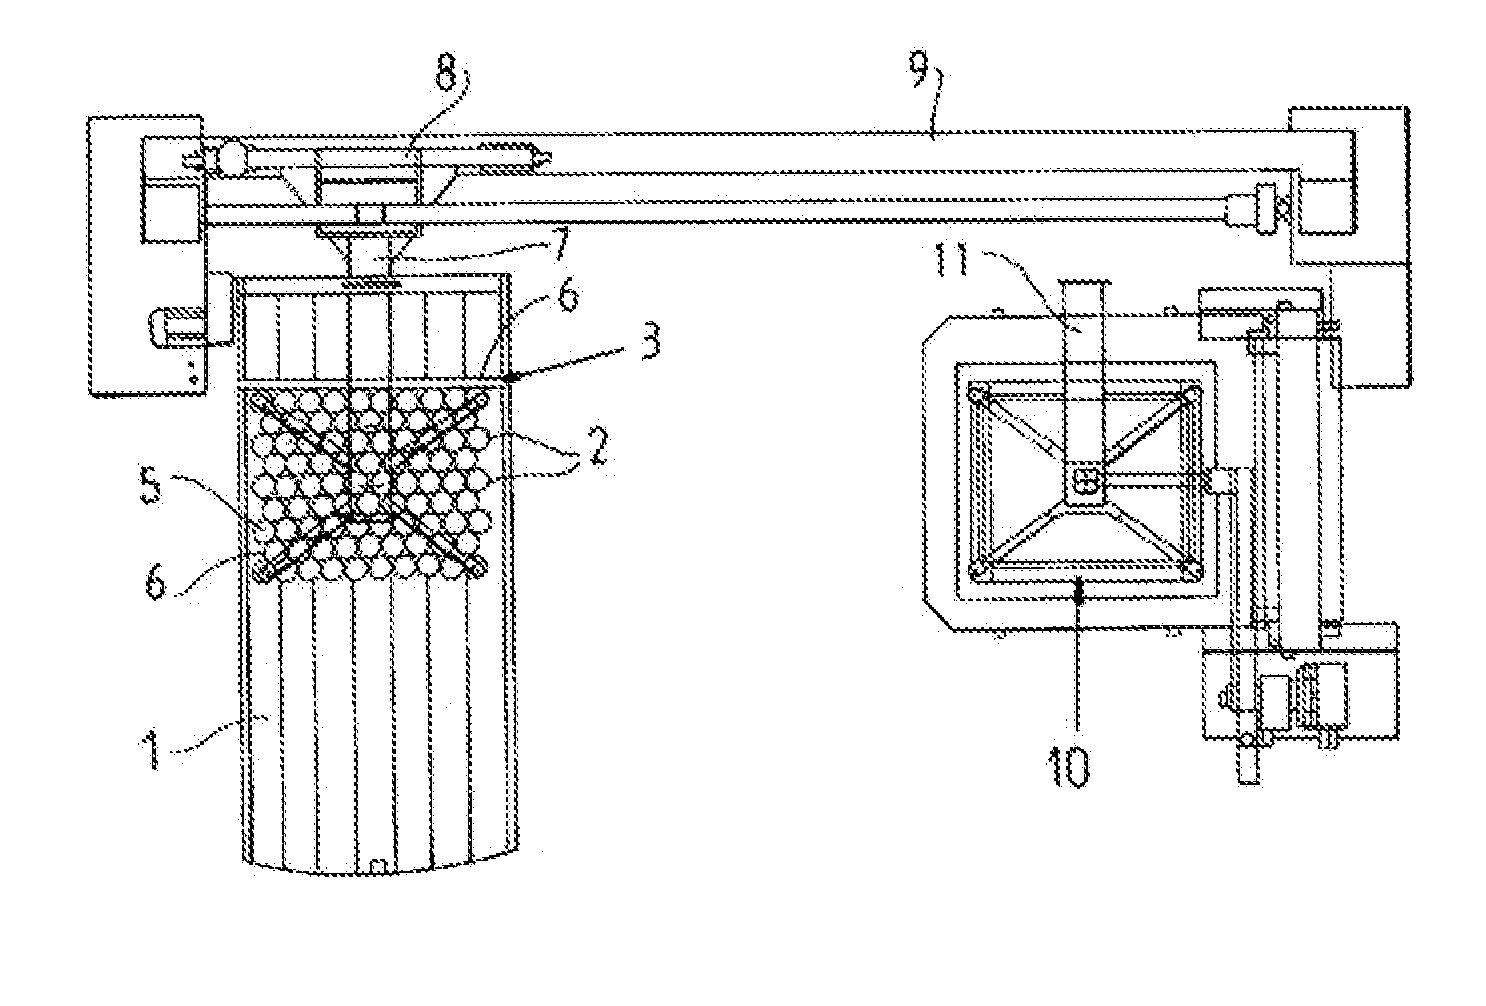 Apparatus for lifting a group of containers or the like